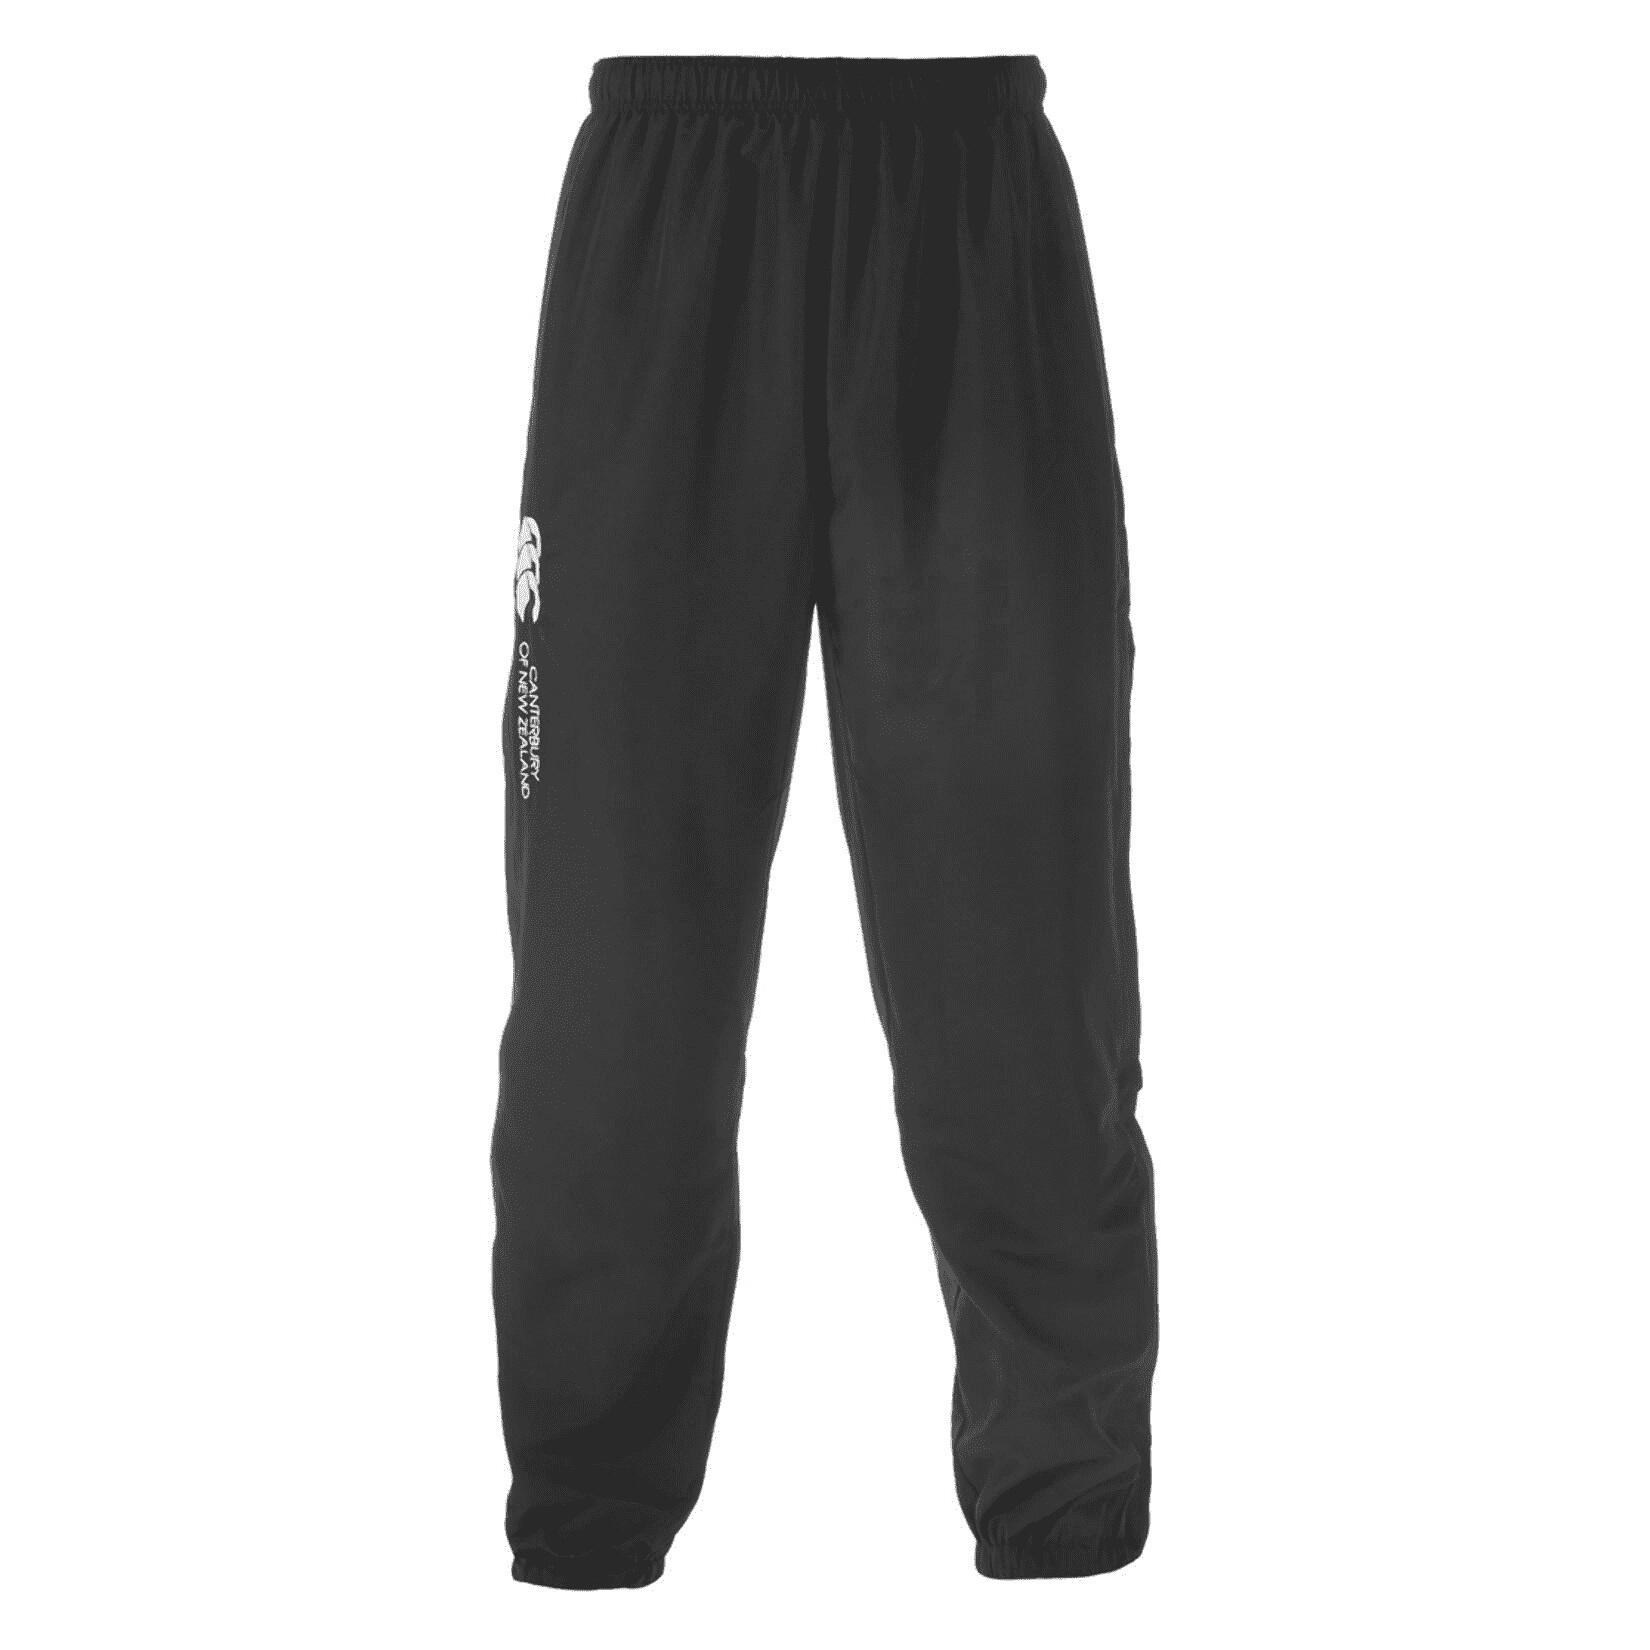 Childrens/Kids Cuffed Ankle Tracksuit Bottoms (Black) 1/3